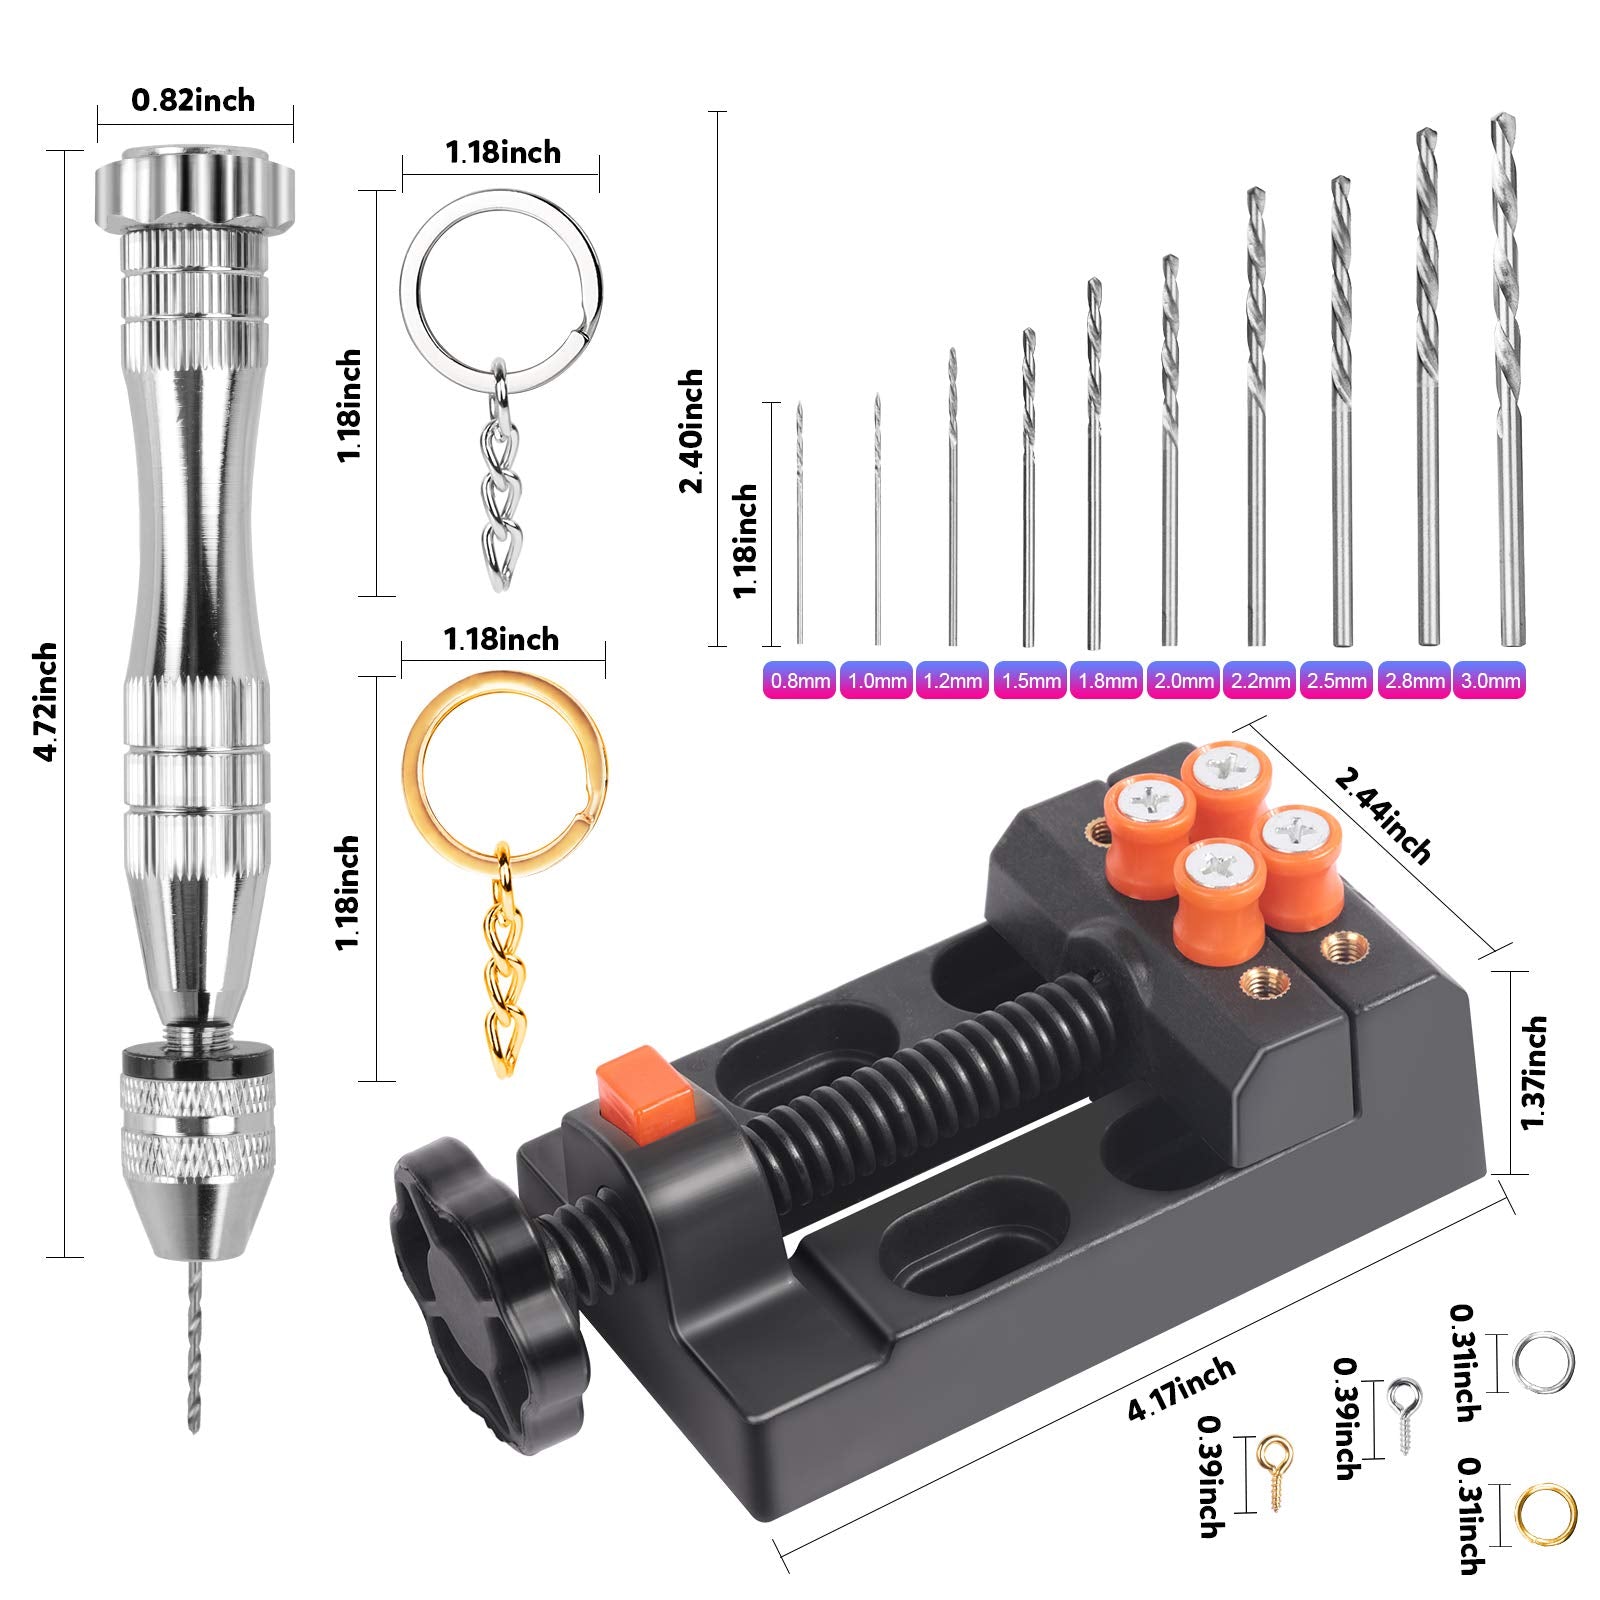 LEOBRO Hand Drill, Pin Vise Hand Drill for Jewelry Making, Mini Drill with Small Drill Bits, Drill Press Vise, 210pcs Keychain Making Supplies, Resin Tools for Jewelry Keychains Miniature Crafts